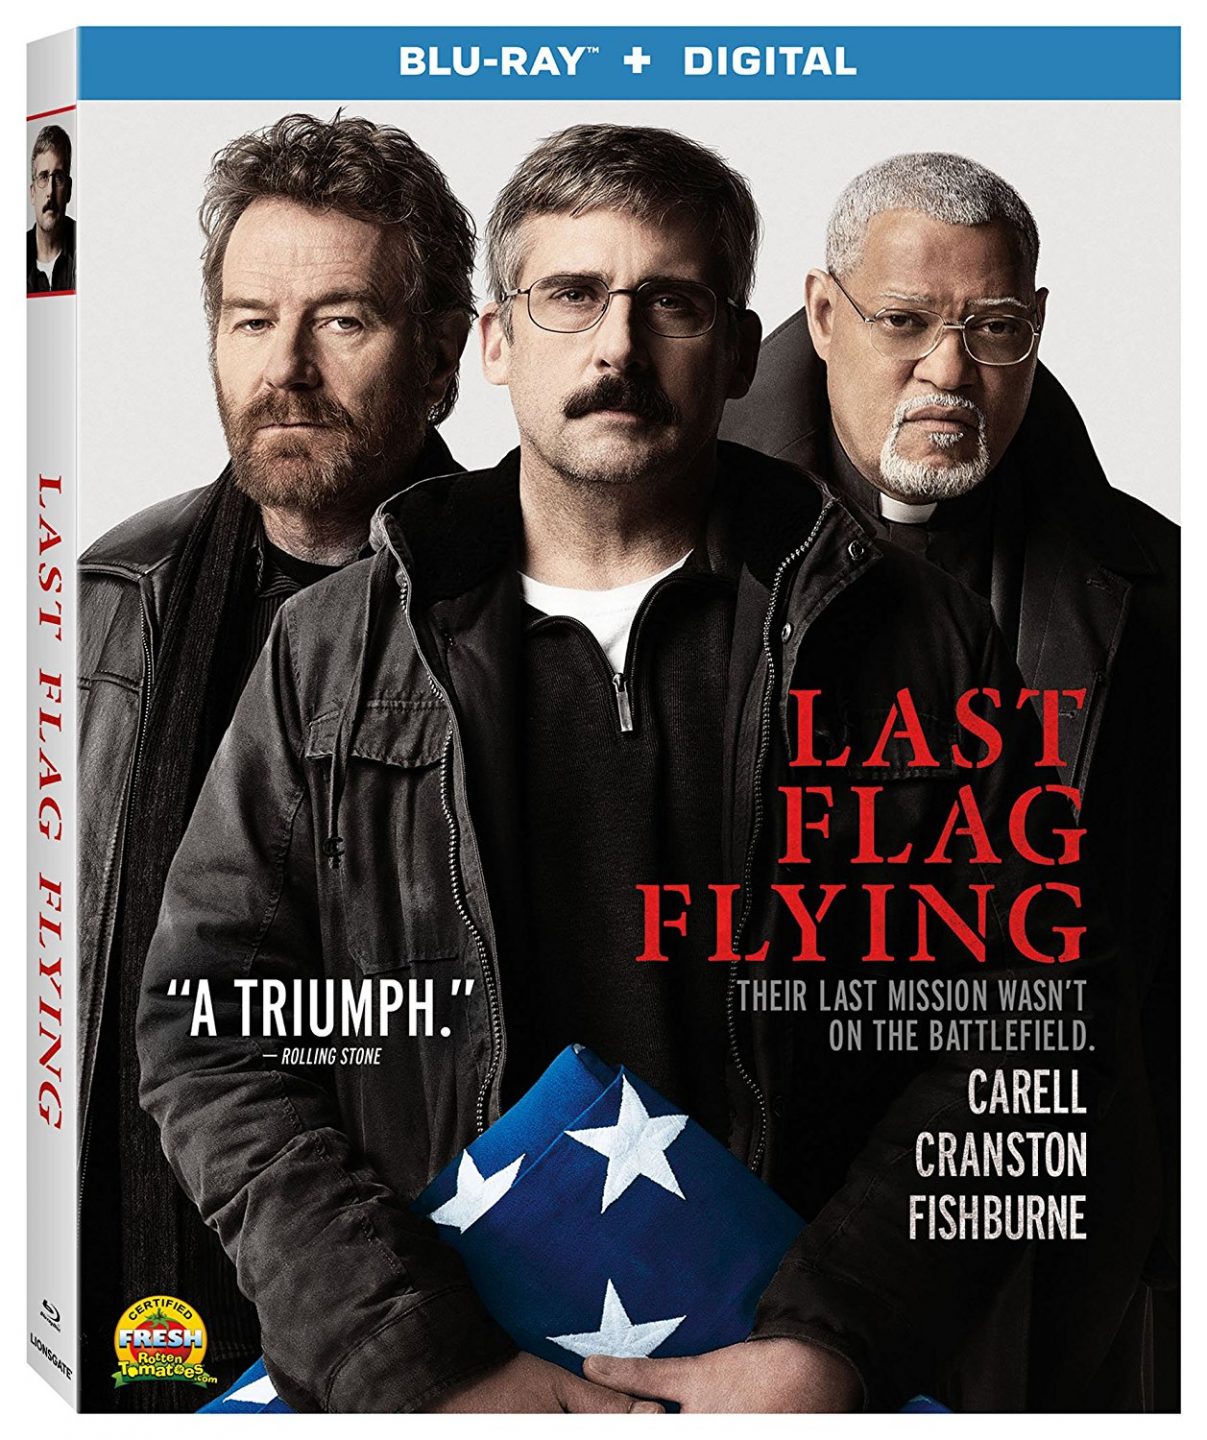 Last Flag Flying Blu-Ray Combo cover (Lionsgate Home Entertainment)